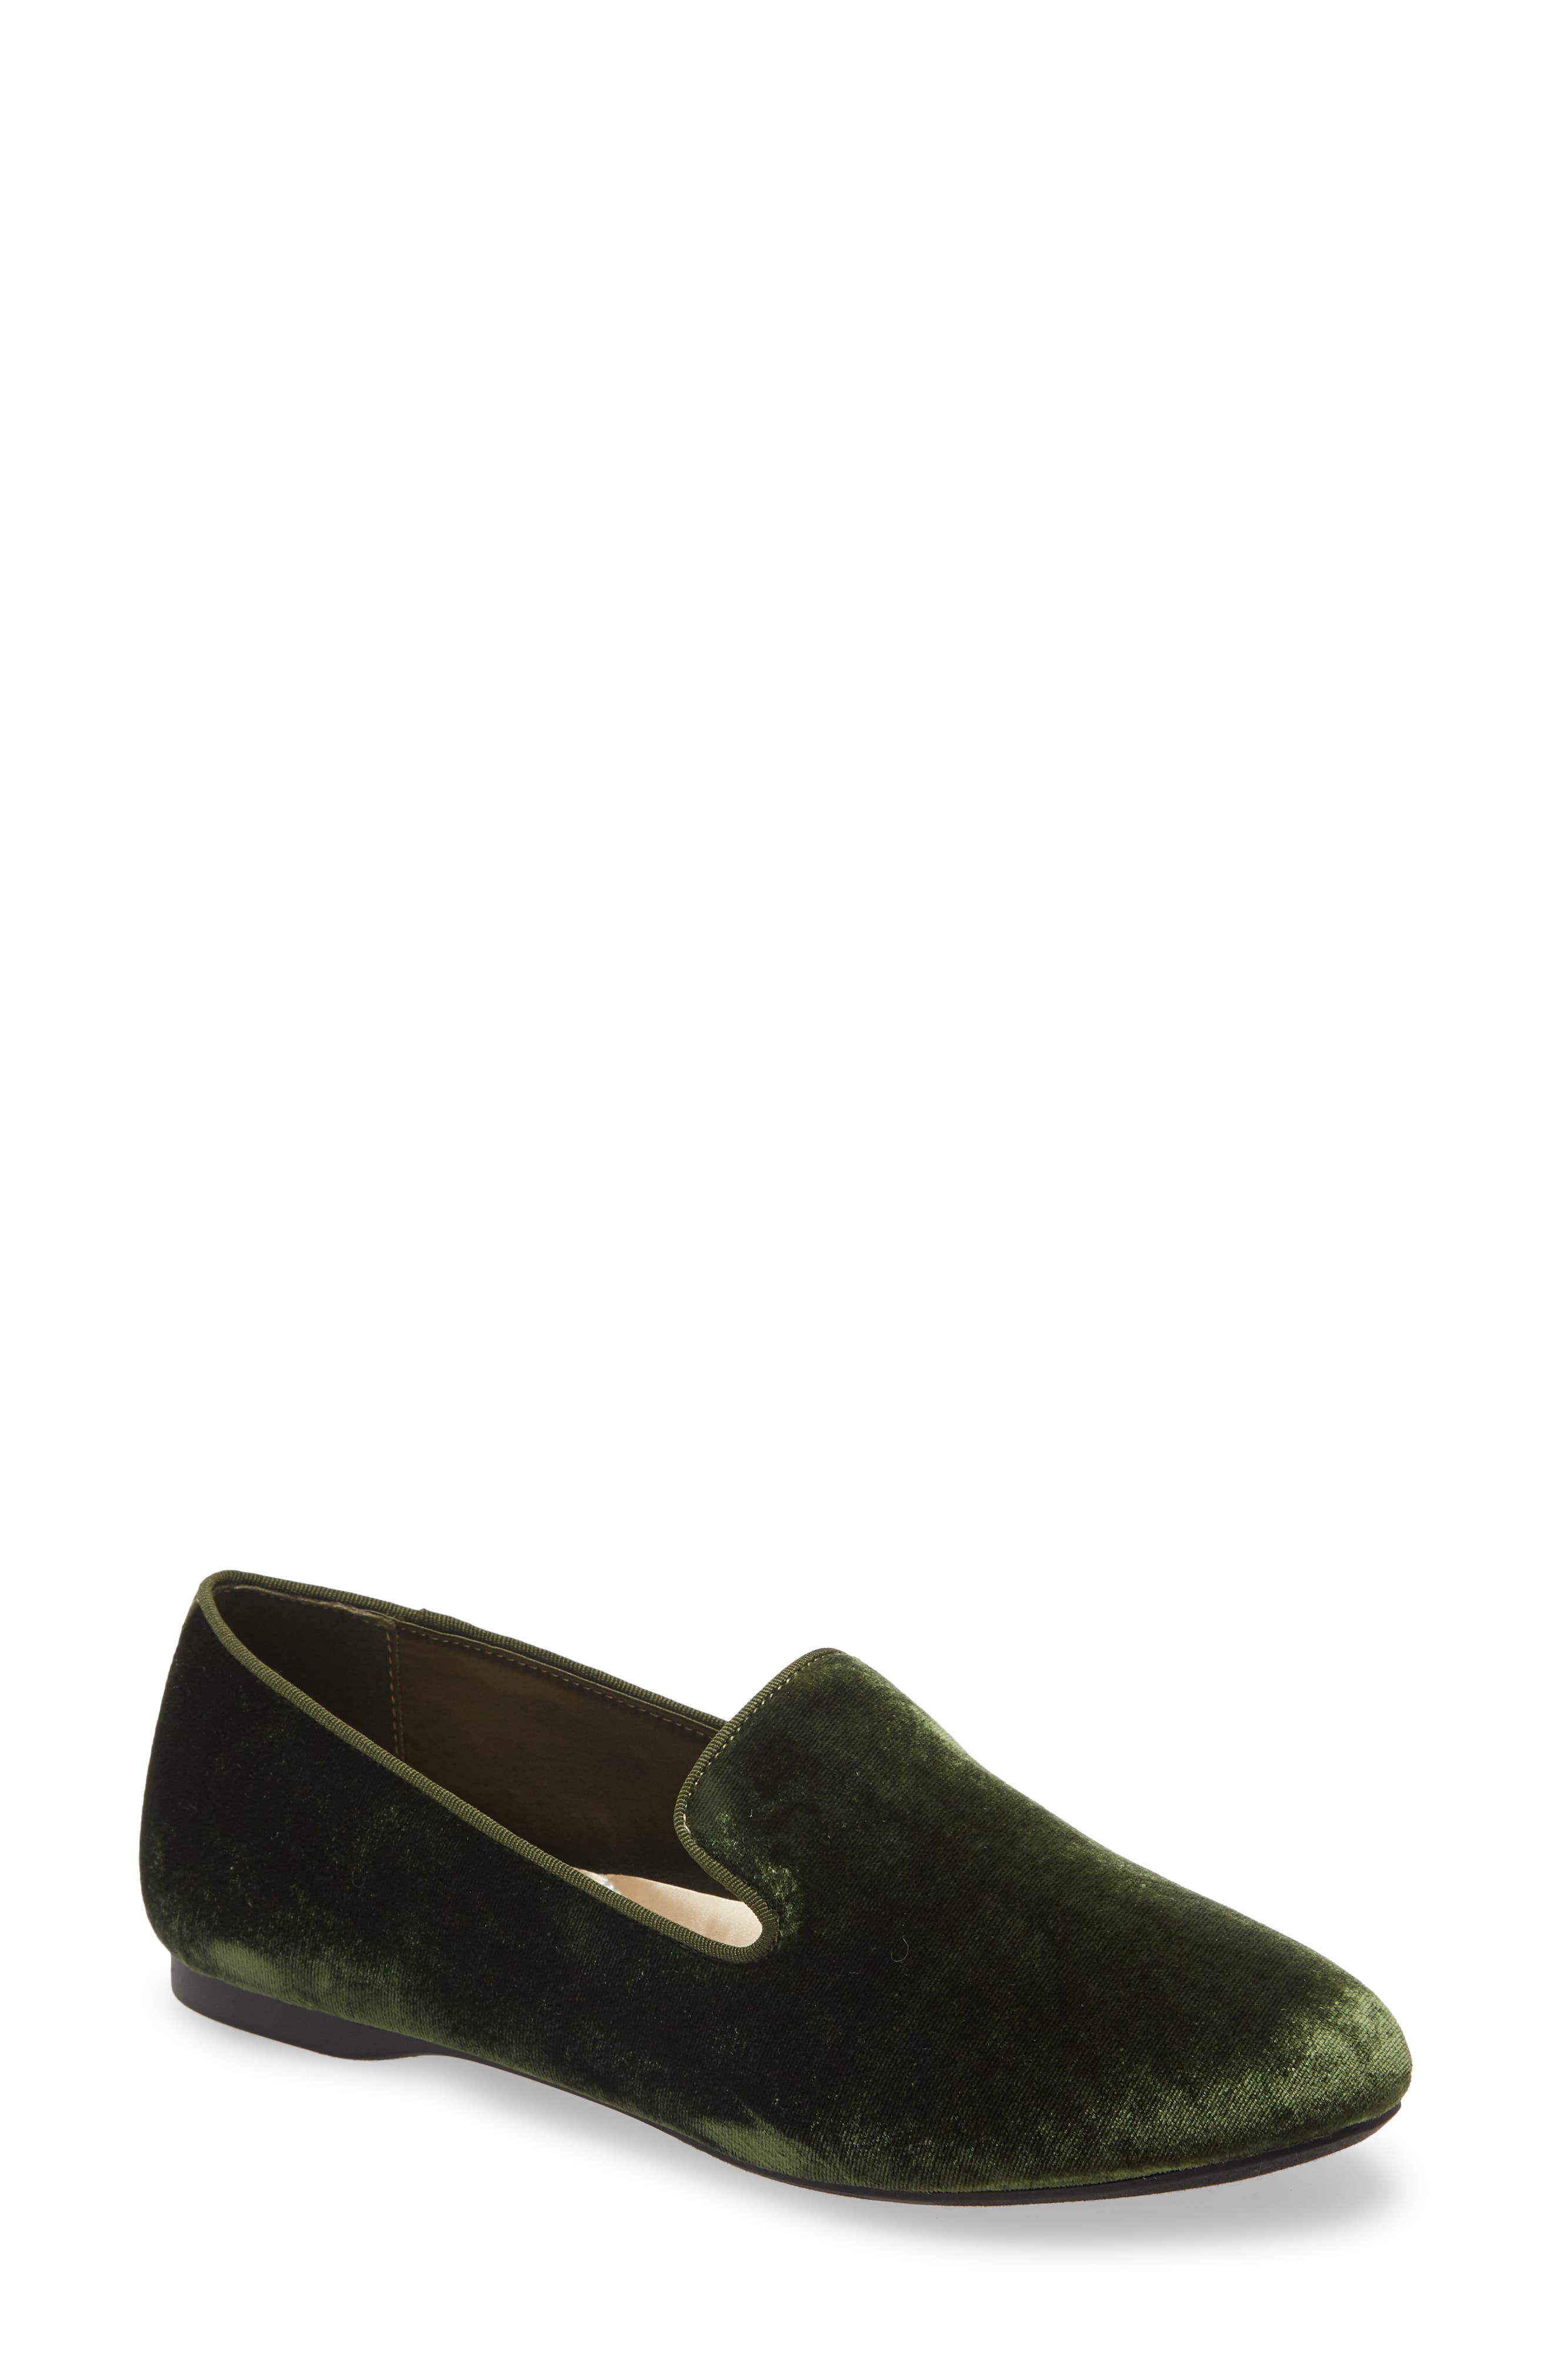 Women's Arch Support Loafers \u0026 Oxfords 